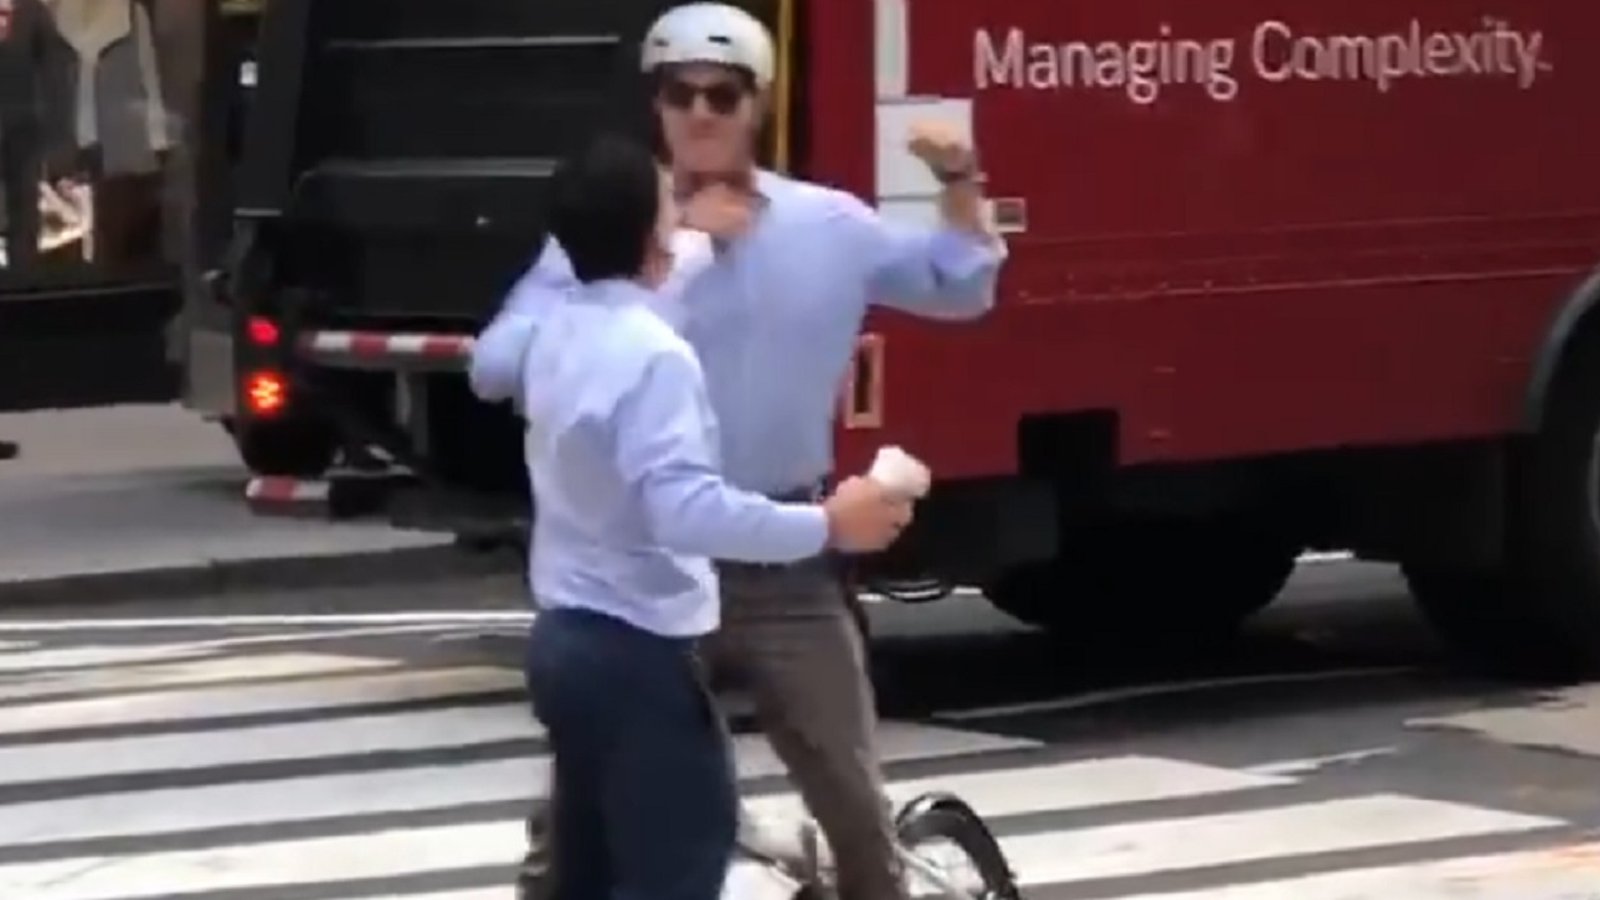 Sean Avery involved in physical altercation on the streets of New York.